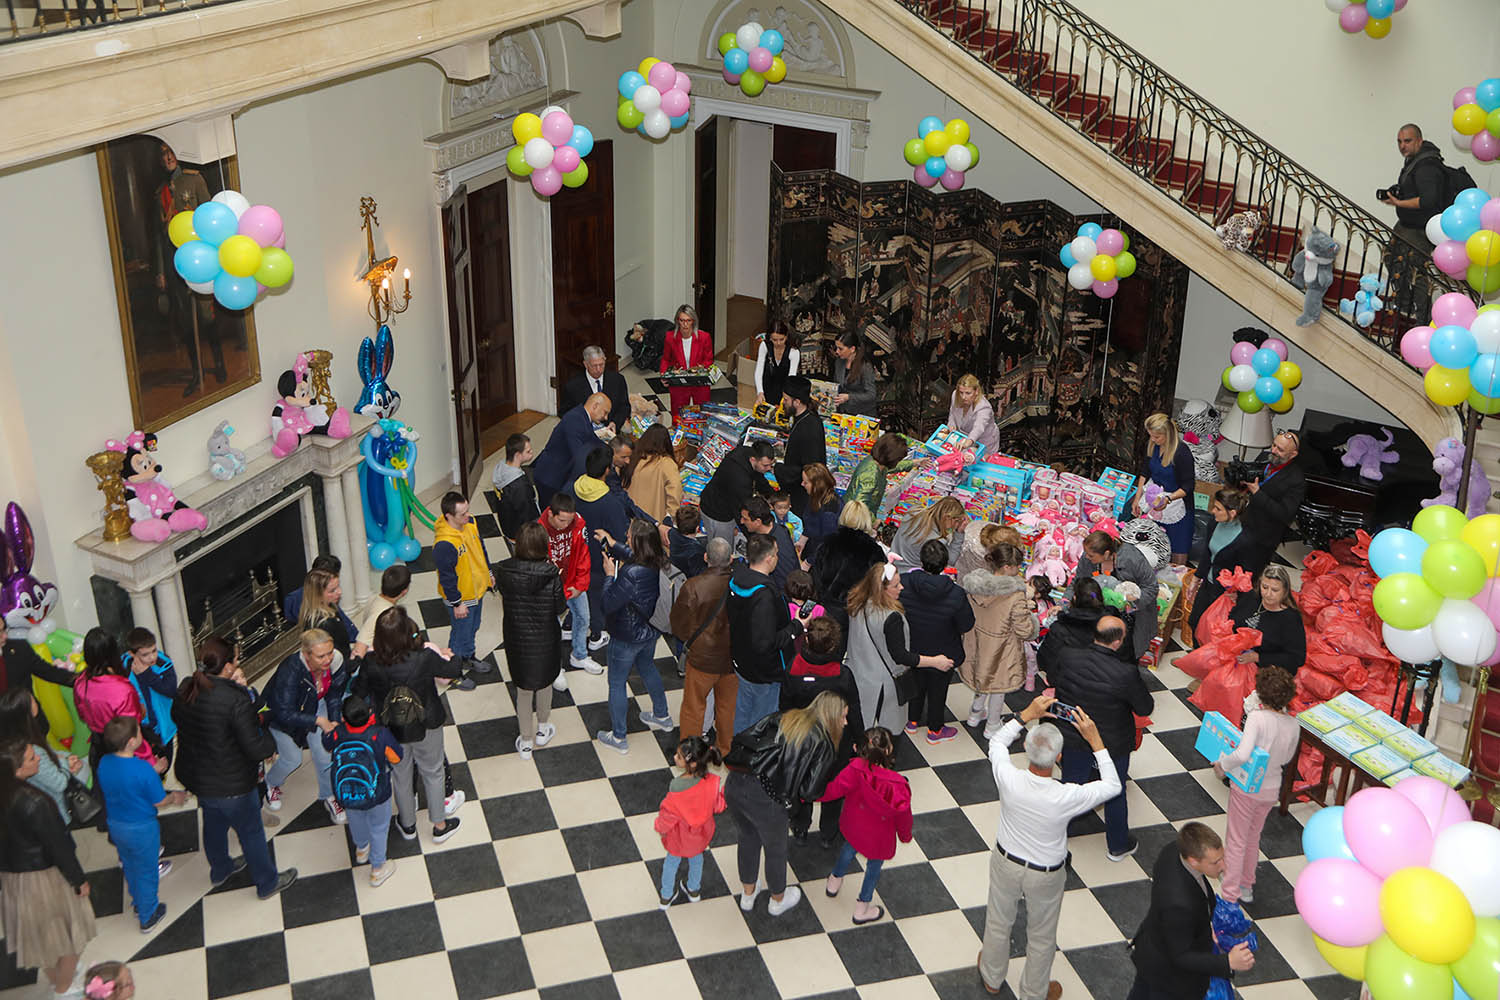 MORE THAN 1,000 CHILDREN REJOICE UPCOMING EASTER AT THE WHITE PALACE